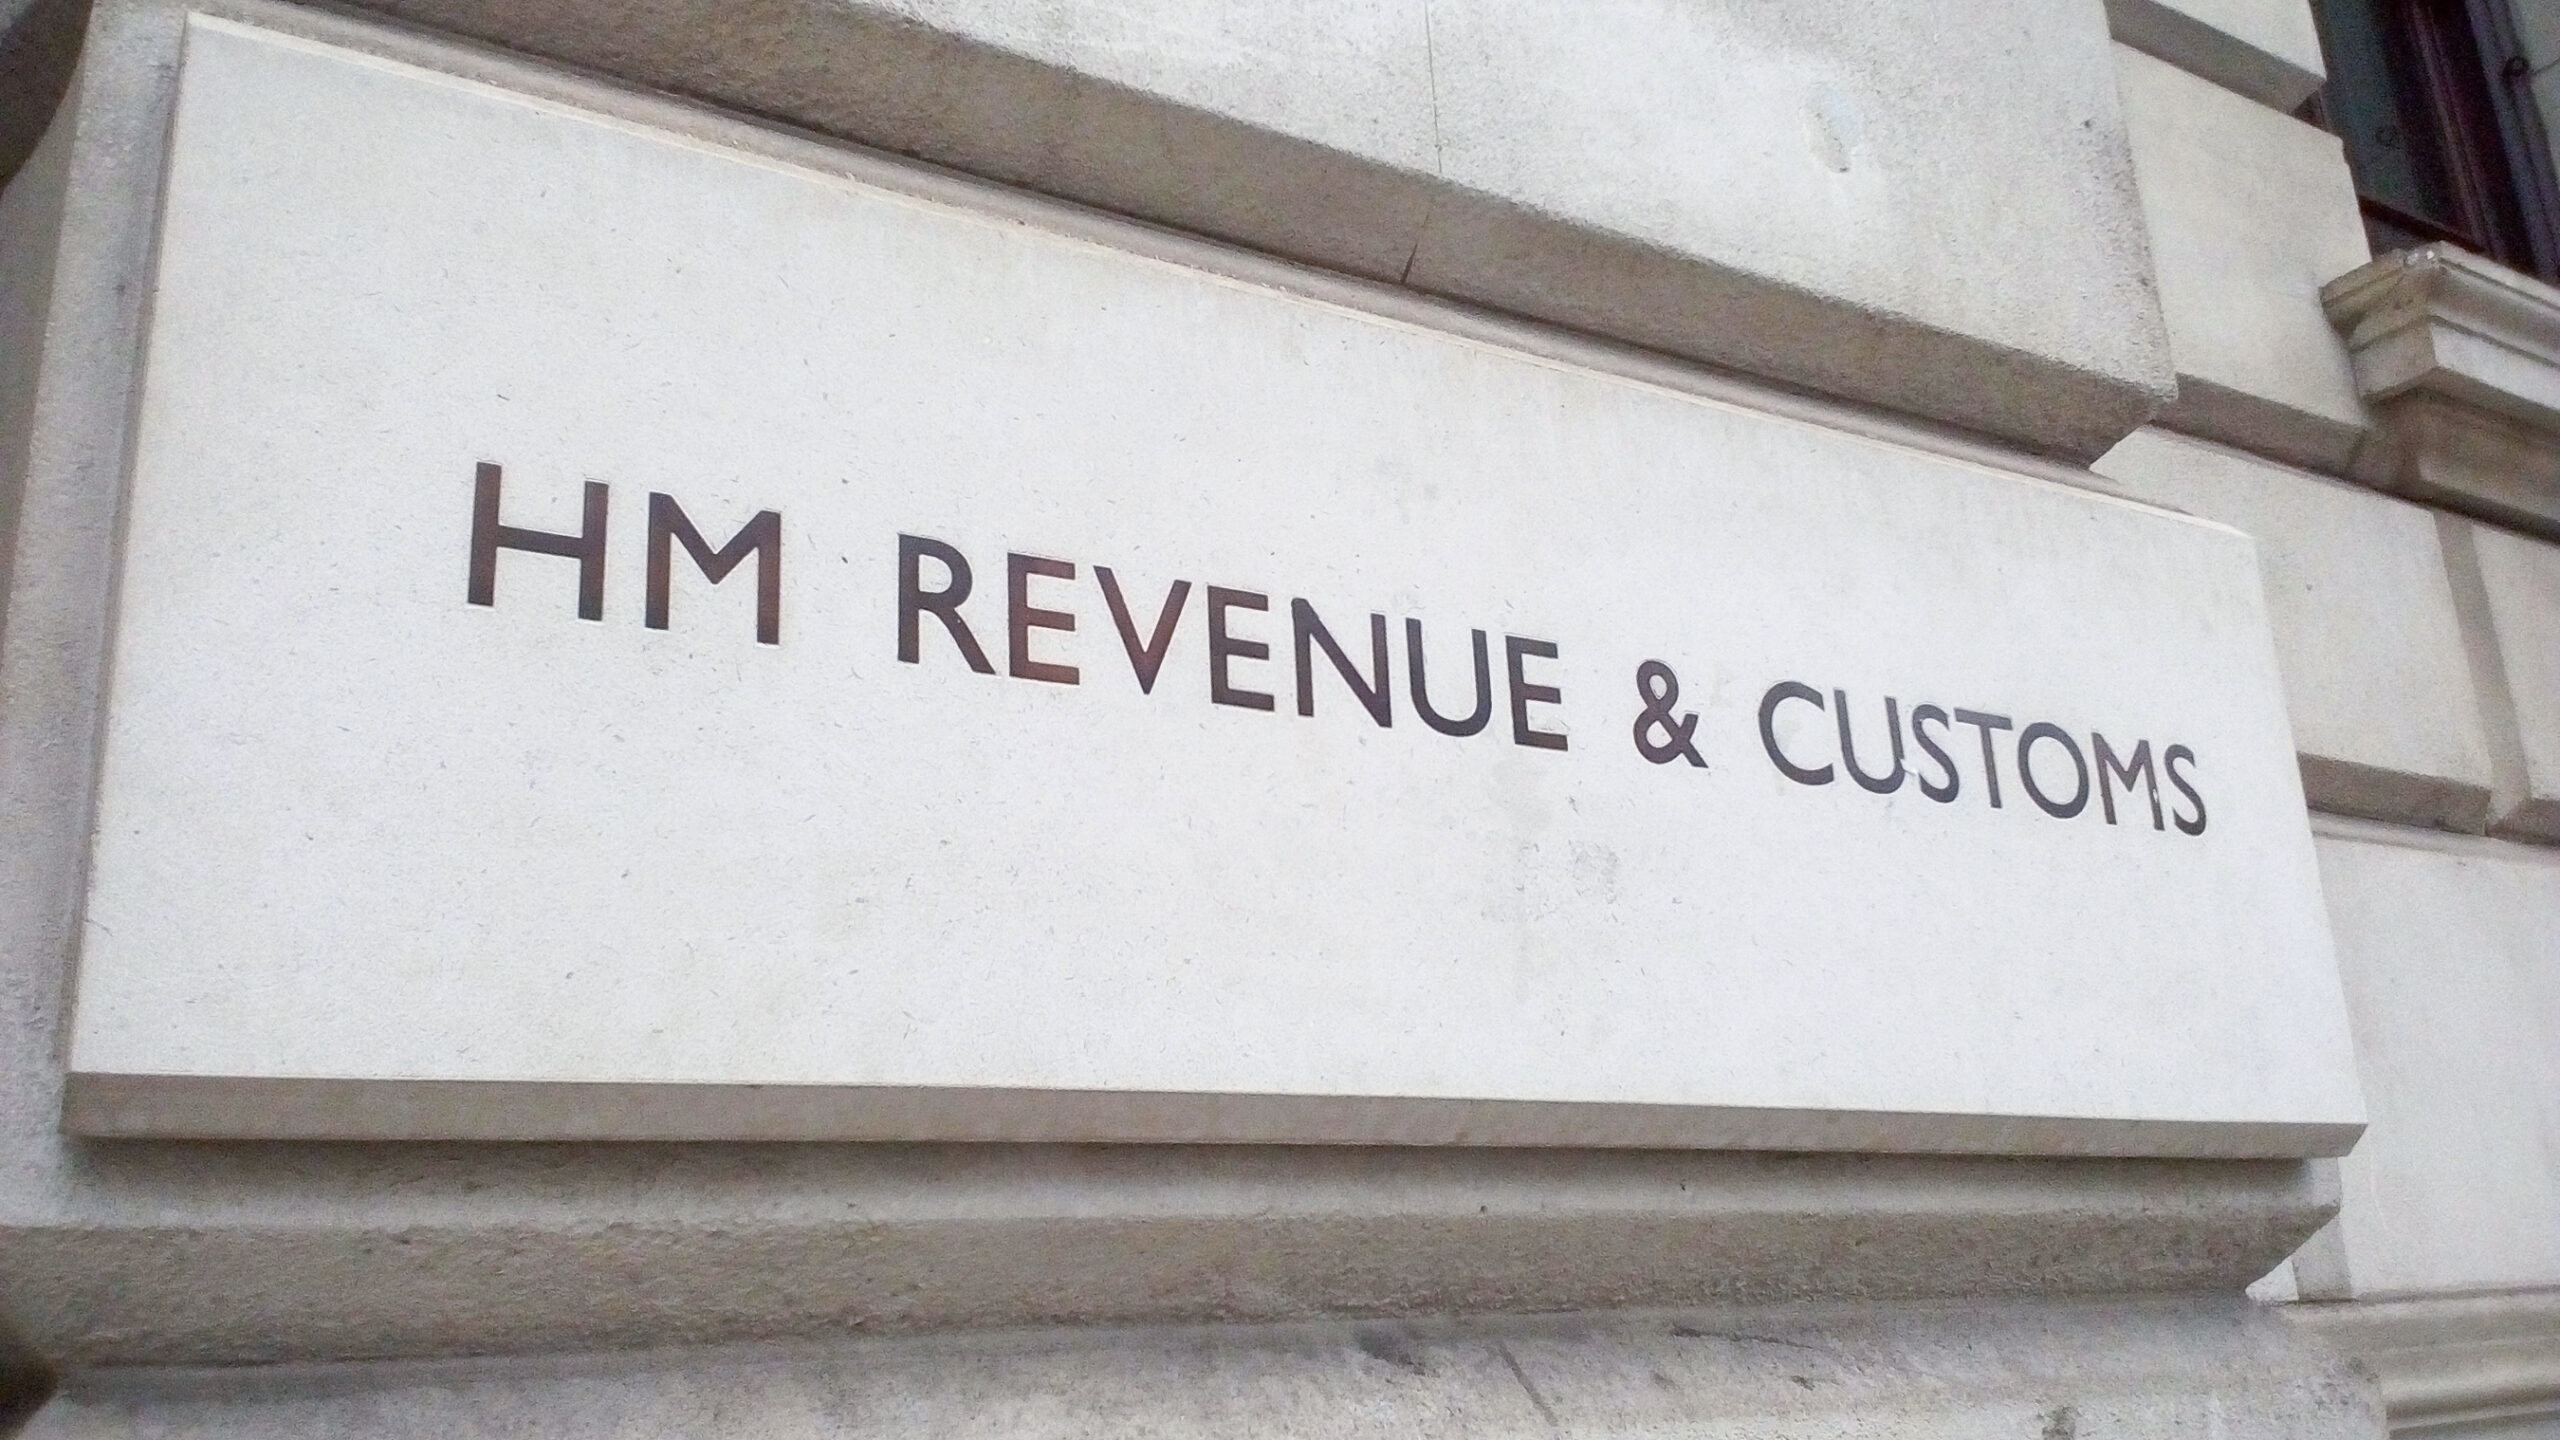 HMRC sign in London